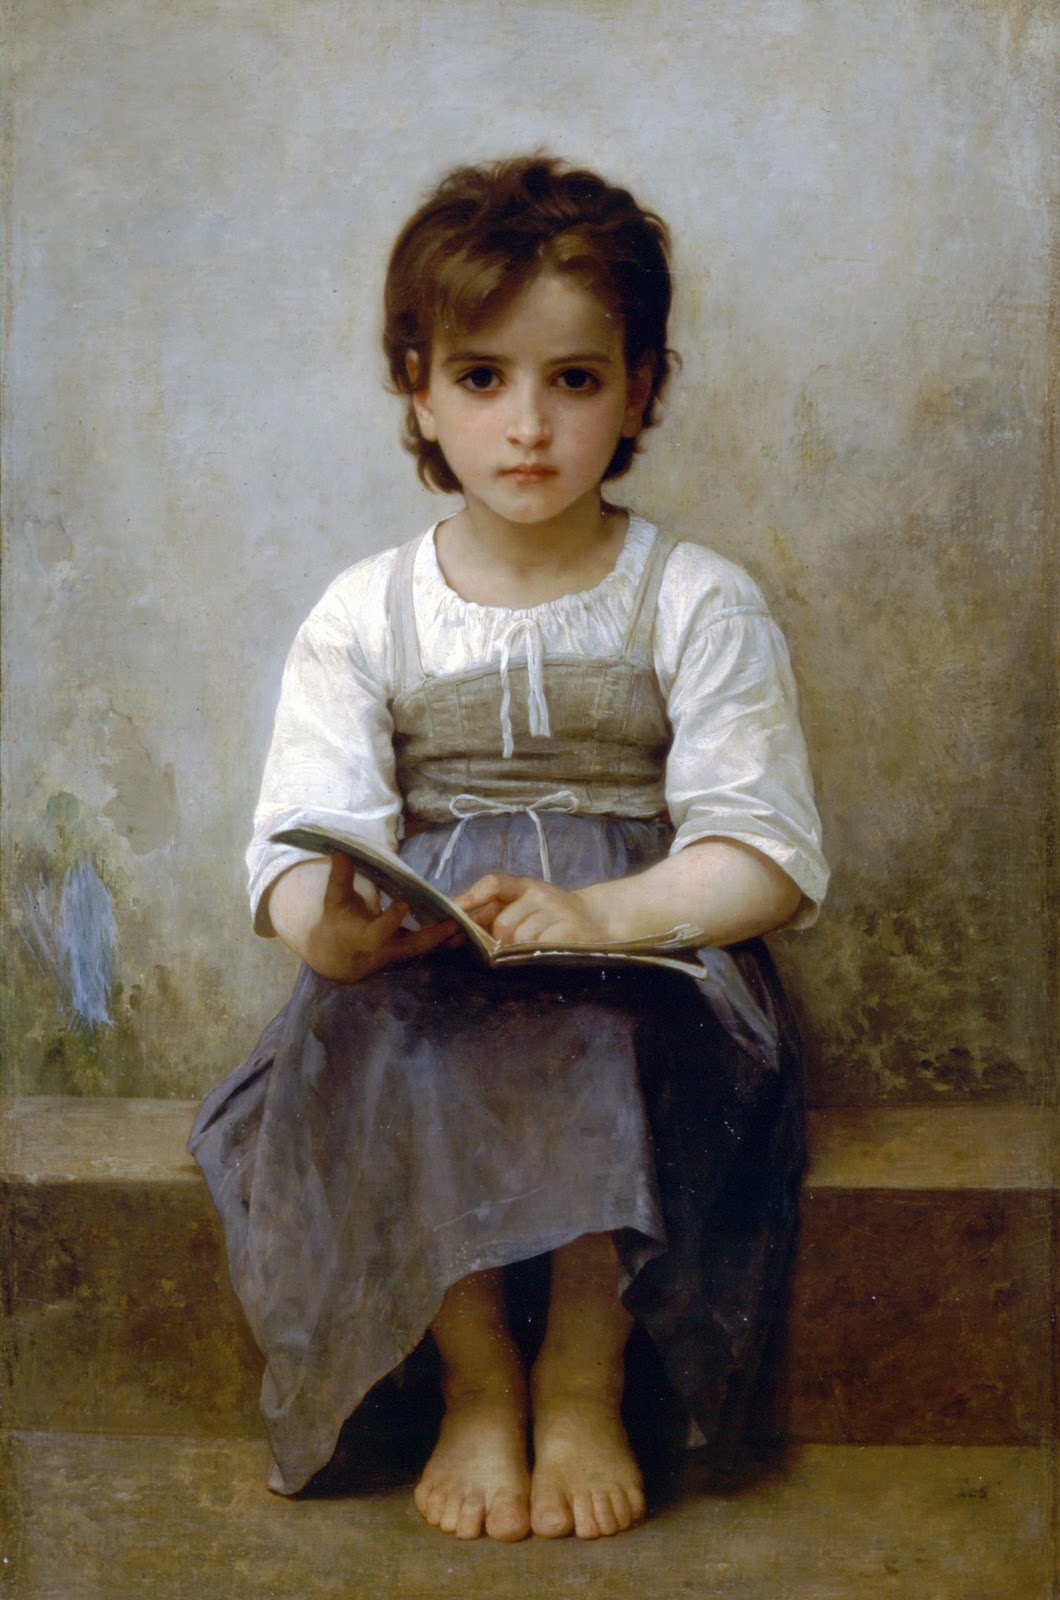 [William-Adolphe_Bouguereau_(1825-1905)_-_The_Difficult_Lesson_(1884)[12].jpg]